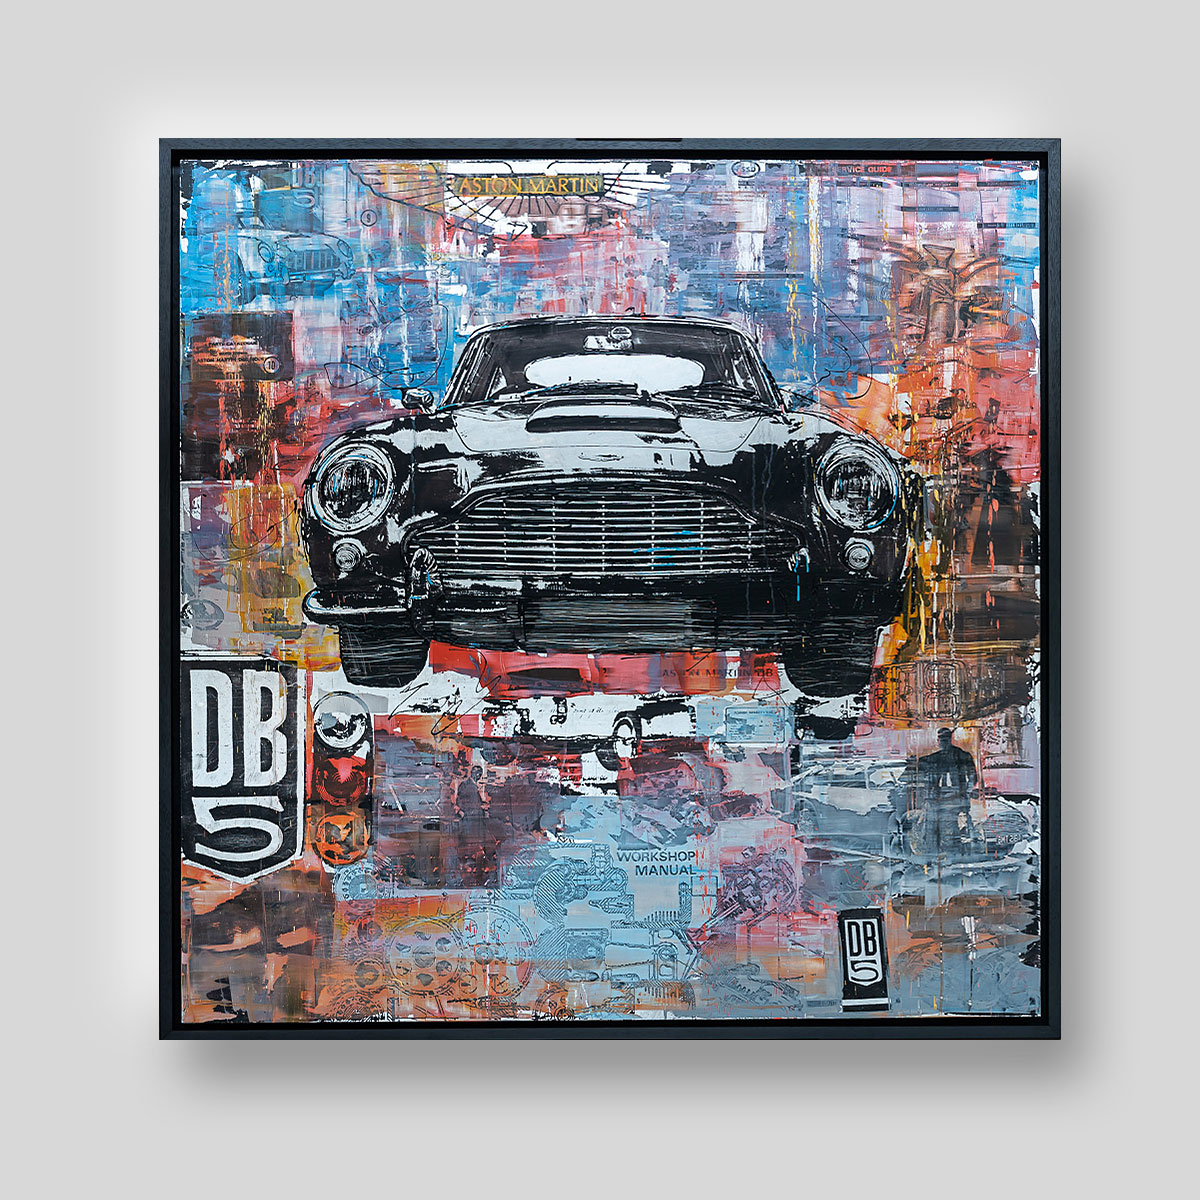 Aston Martin DB5 by Paul Kenton, UK Contemporary artist, an original painting from his Motorsports collection